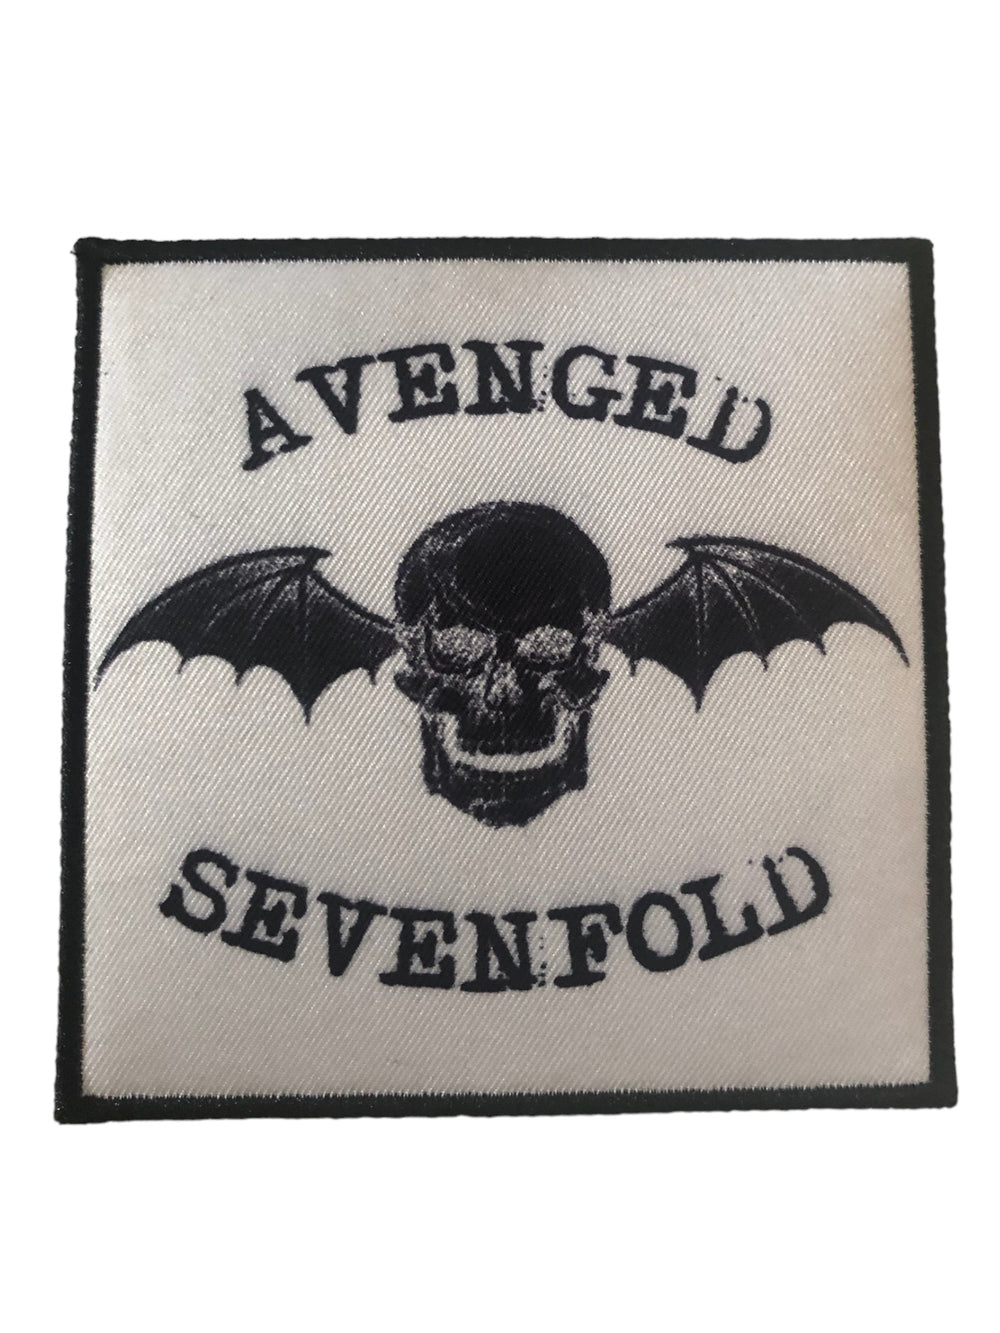 Avenged Sevenfold Death Bat Negative Official Woven Patch Brand New